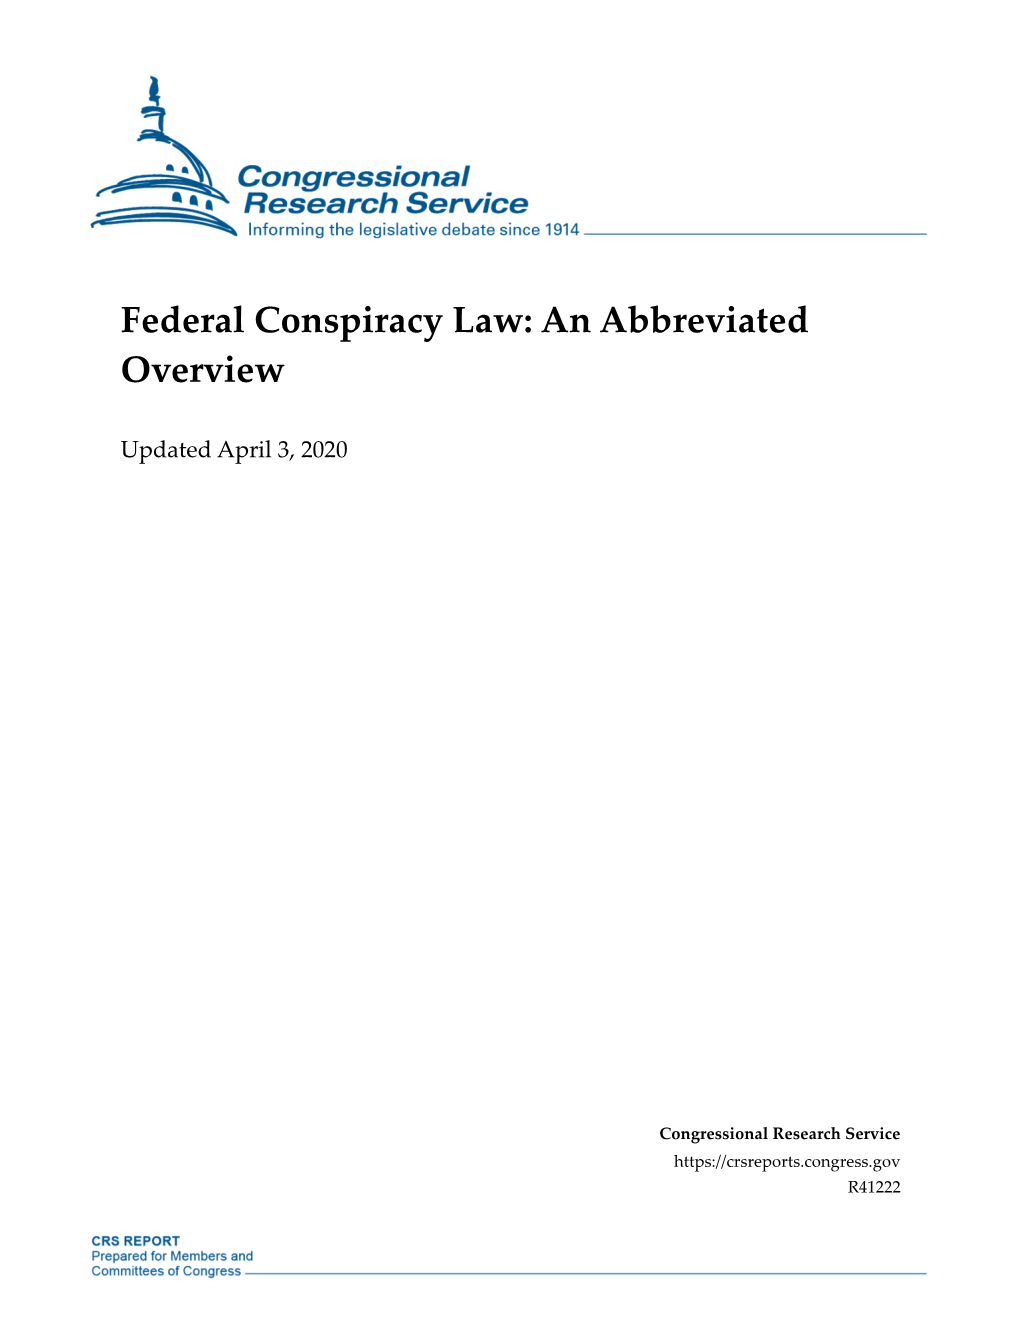 Federal Conspiracy Law: an Abbreviated Overview